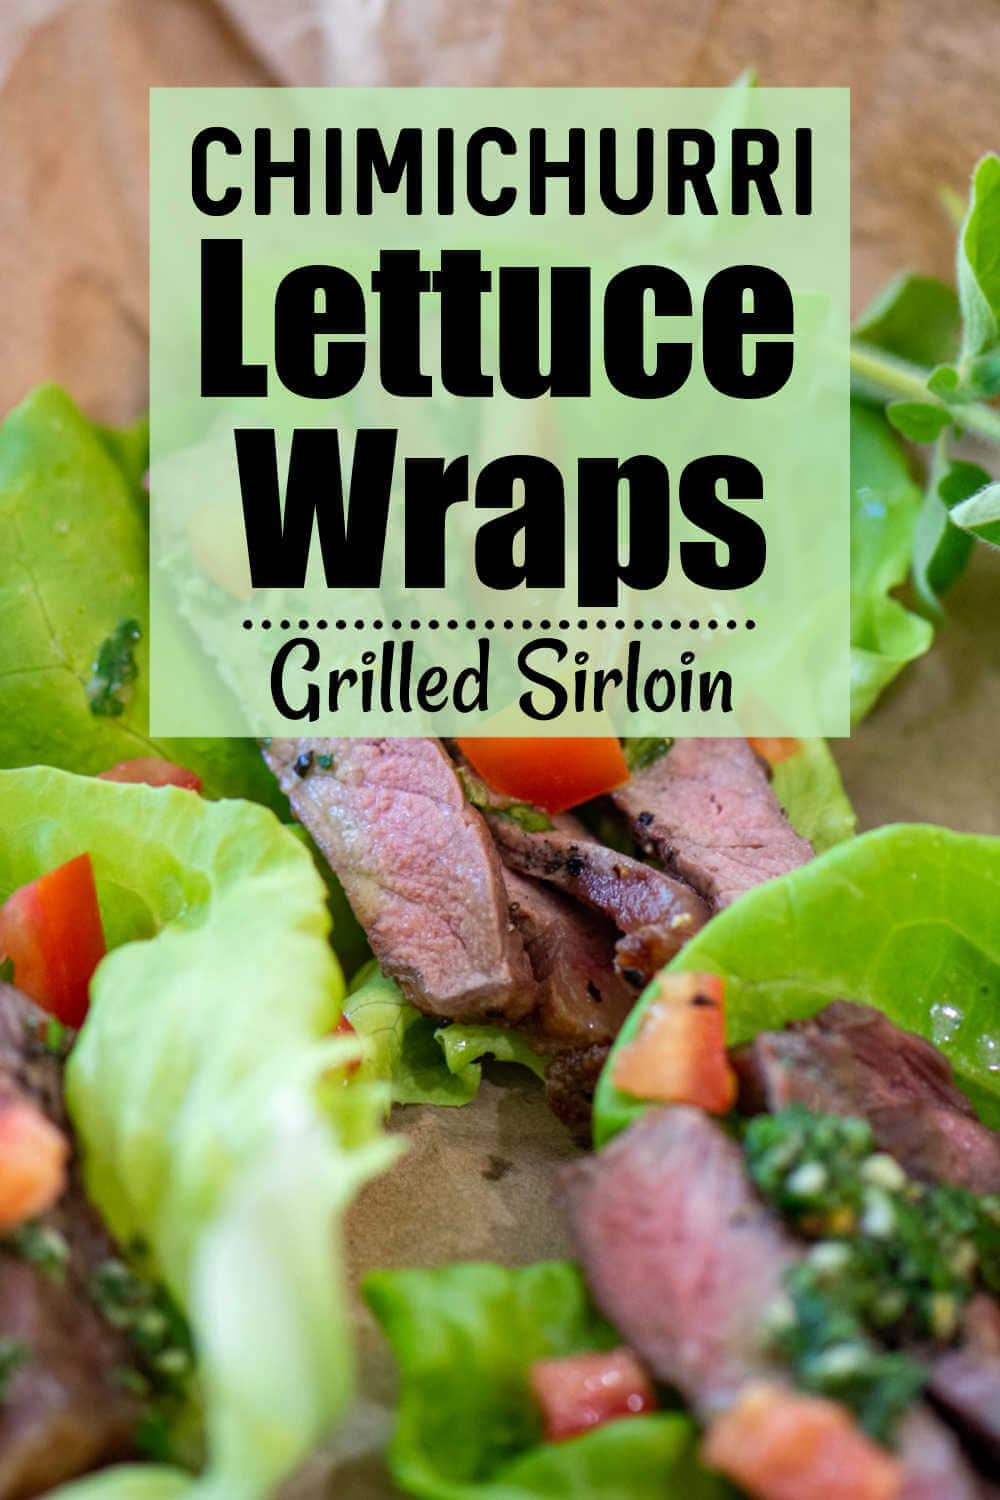 Grilled Sirloin Steak with Chimichurri in Lettuce Wraps